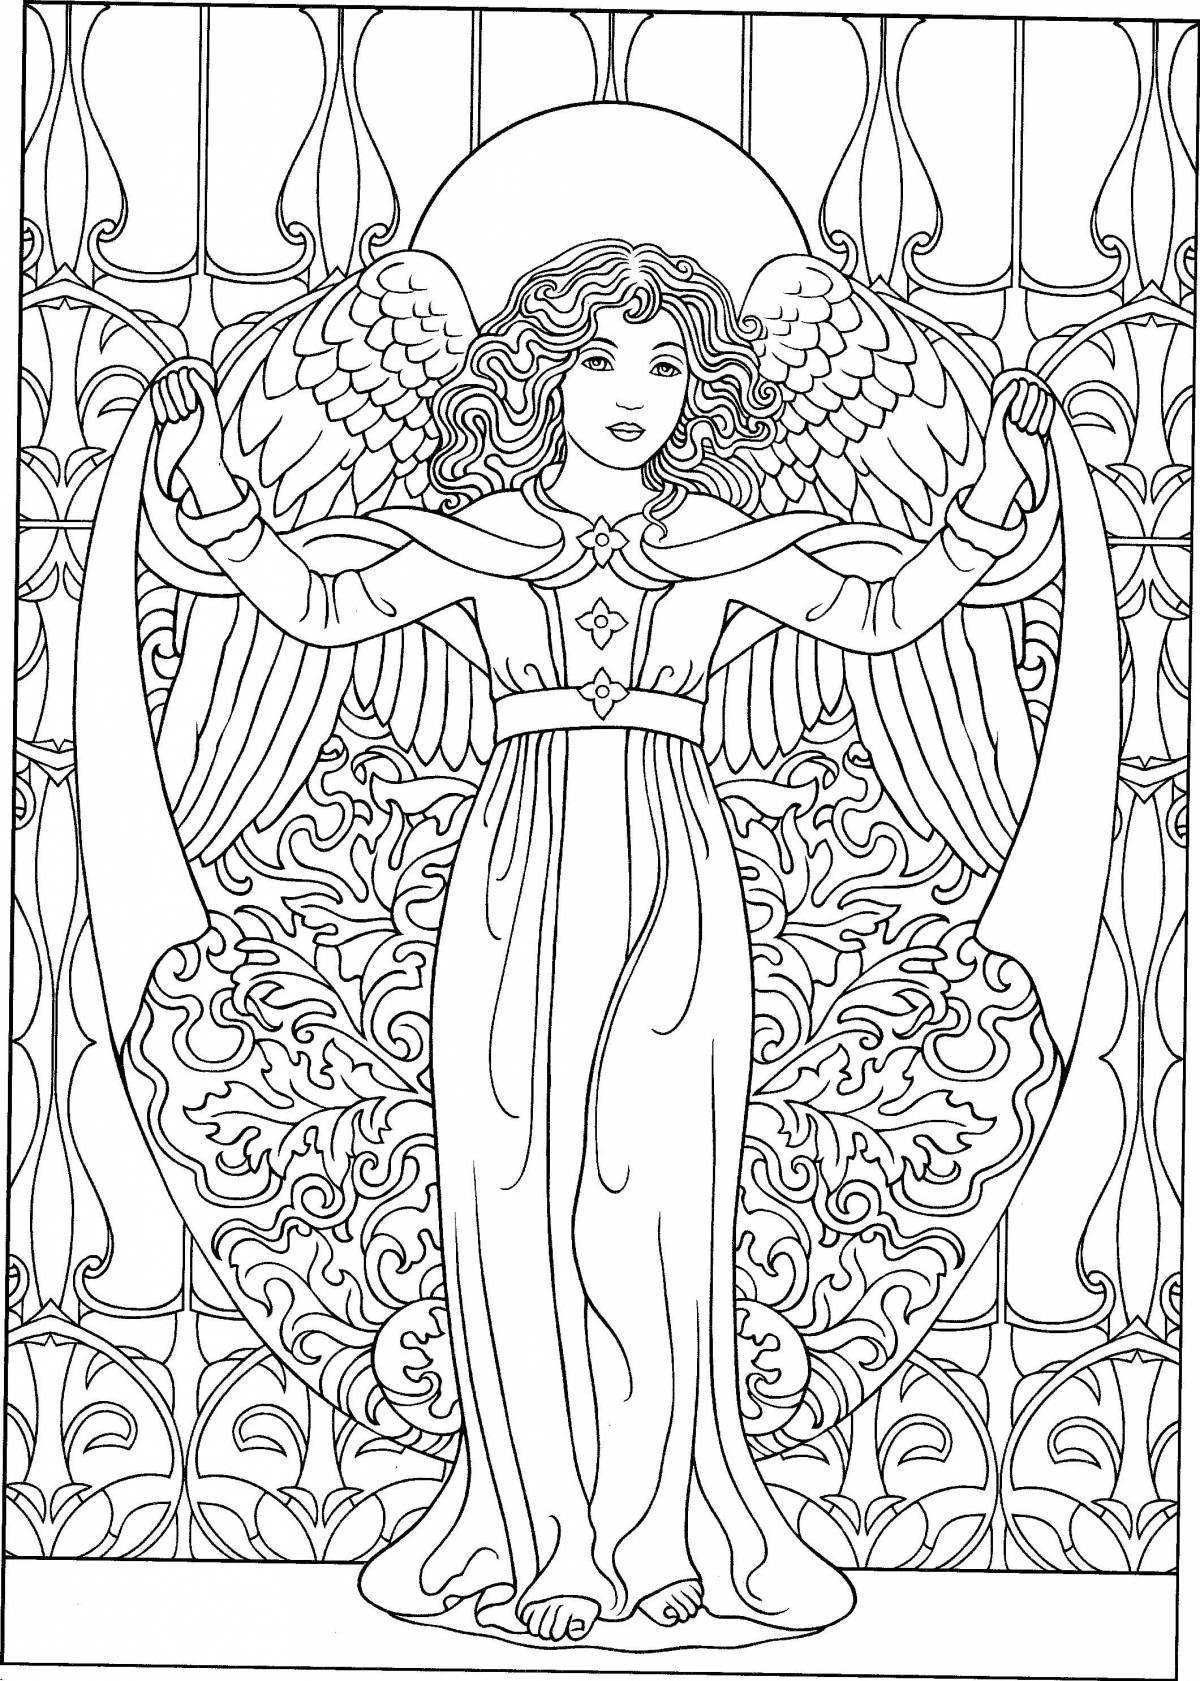 Sublime angel antistress coloring book